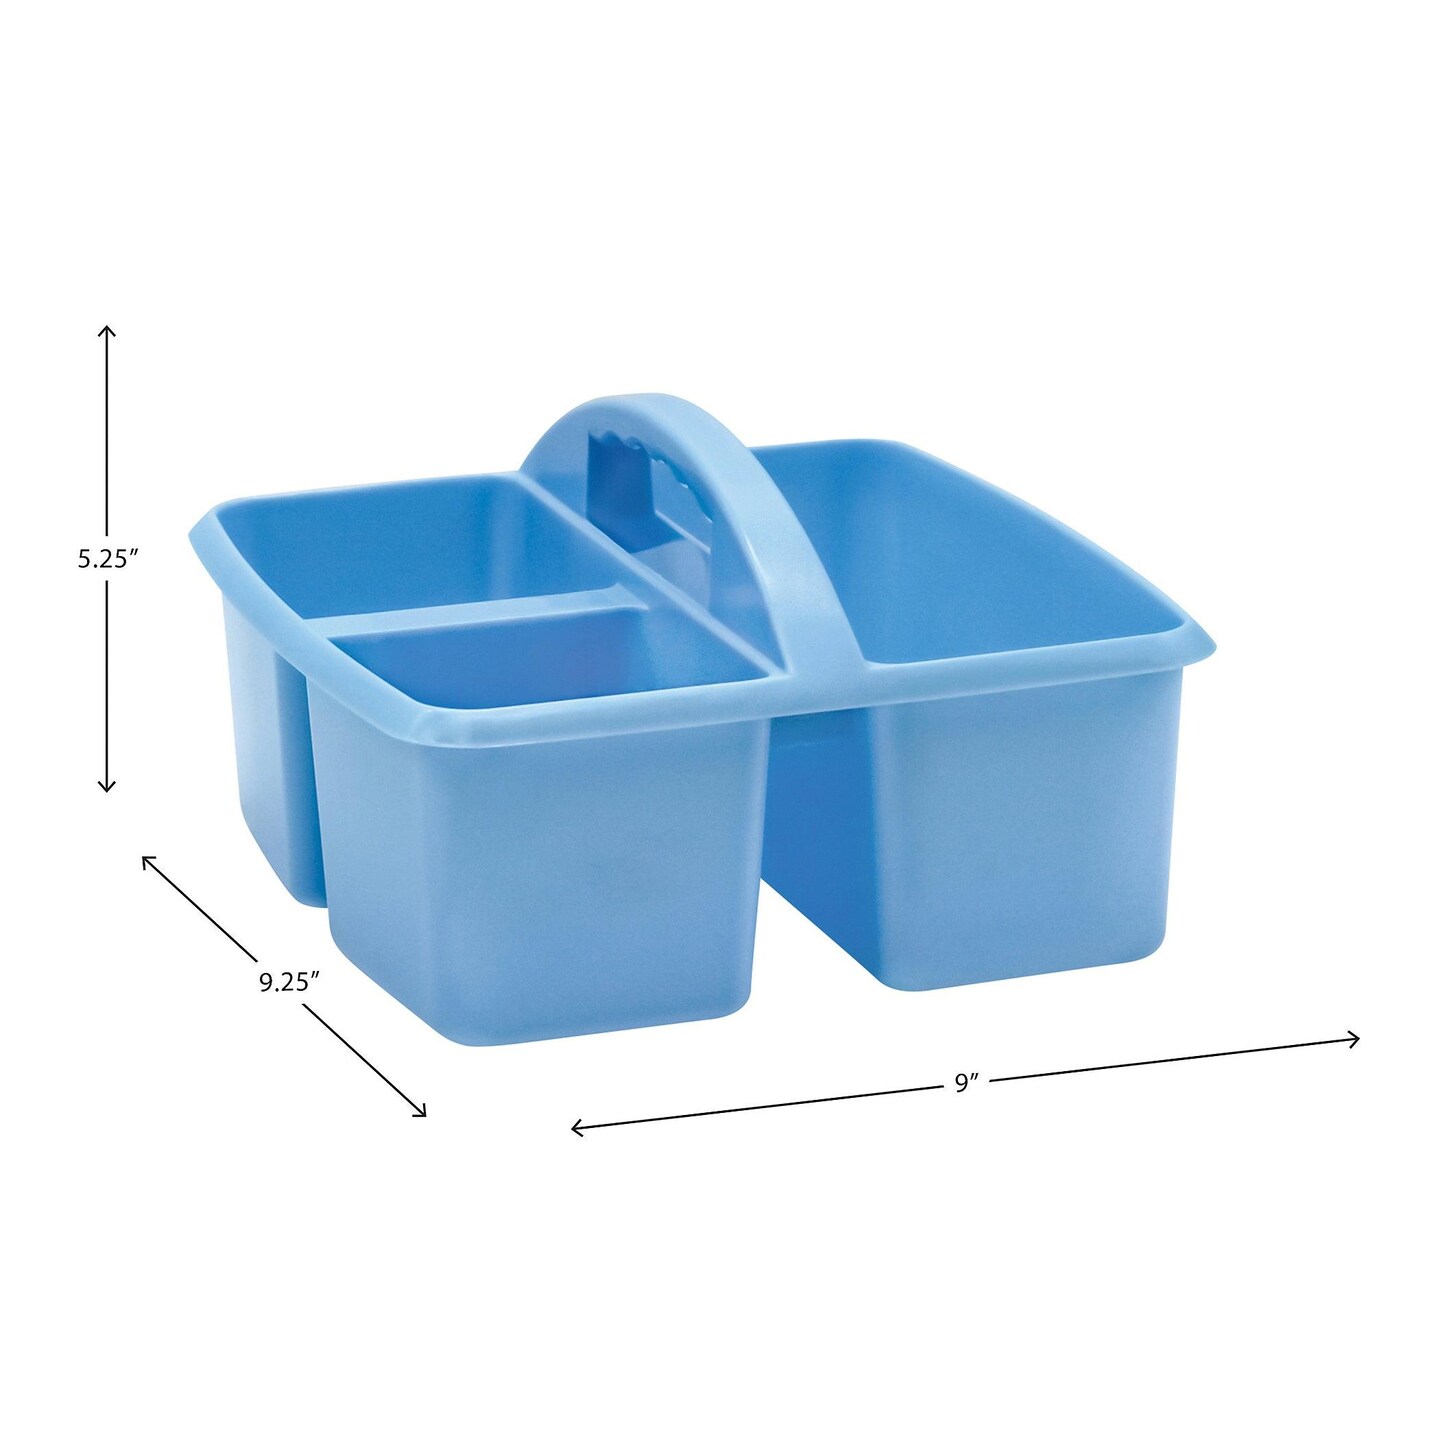 Light Blue Plastic Storage Caddy, Pack of 6